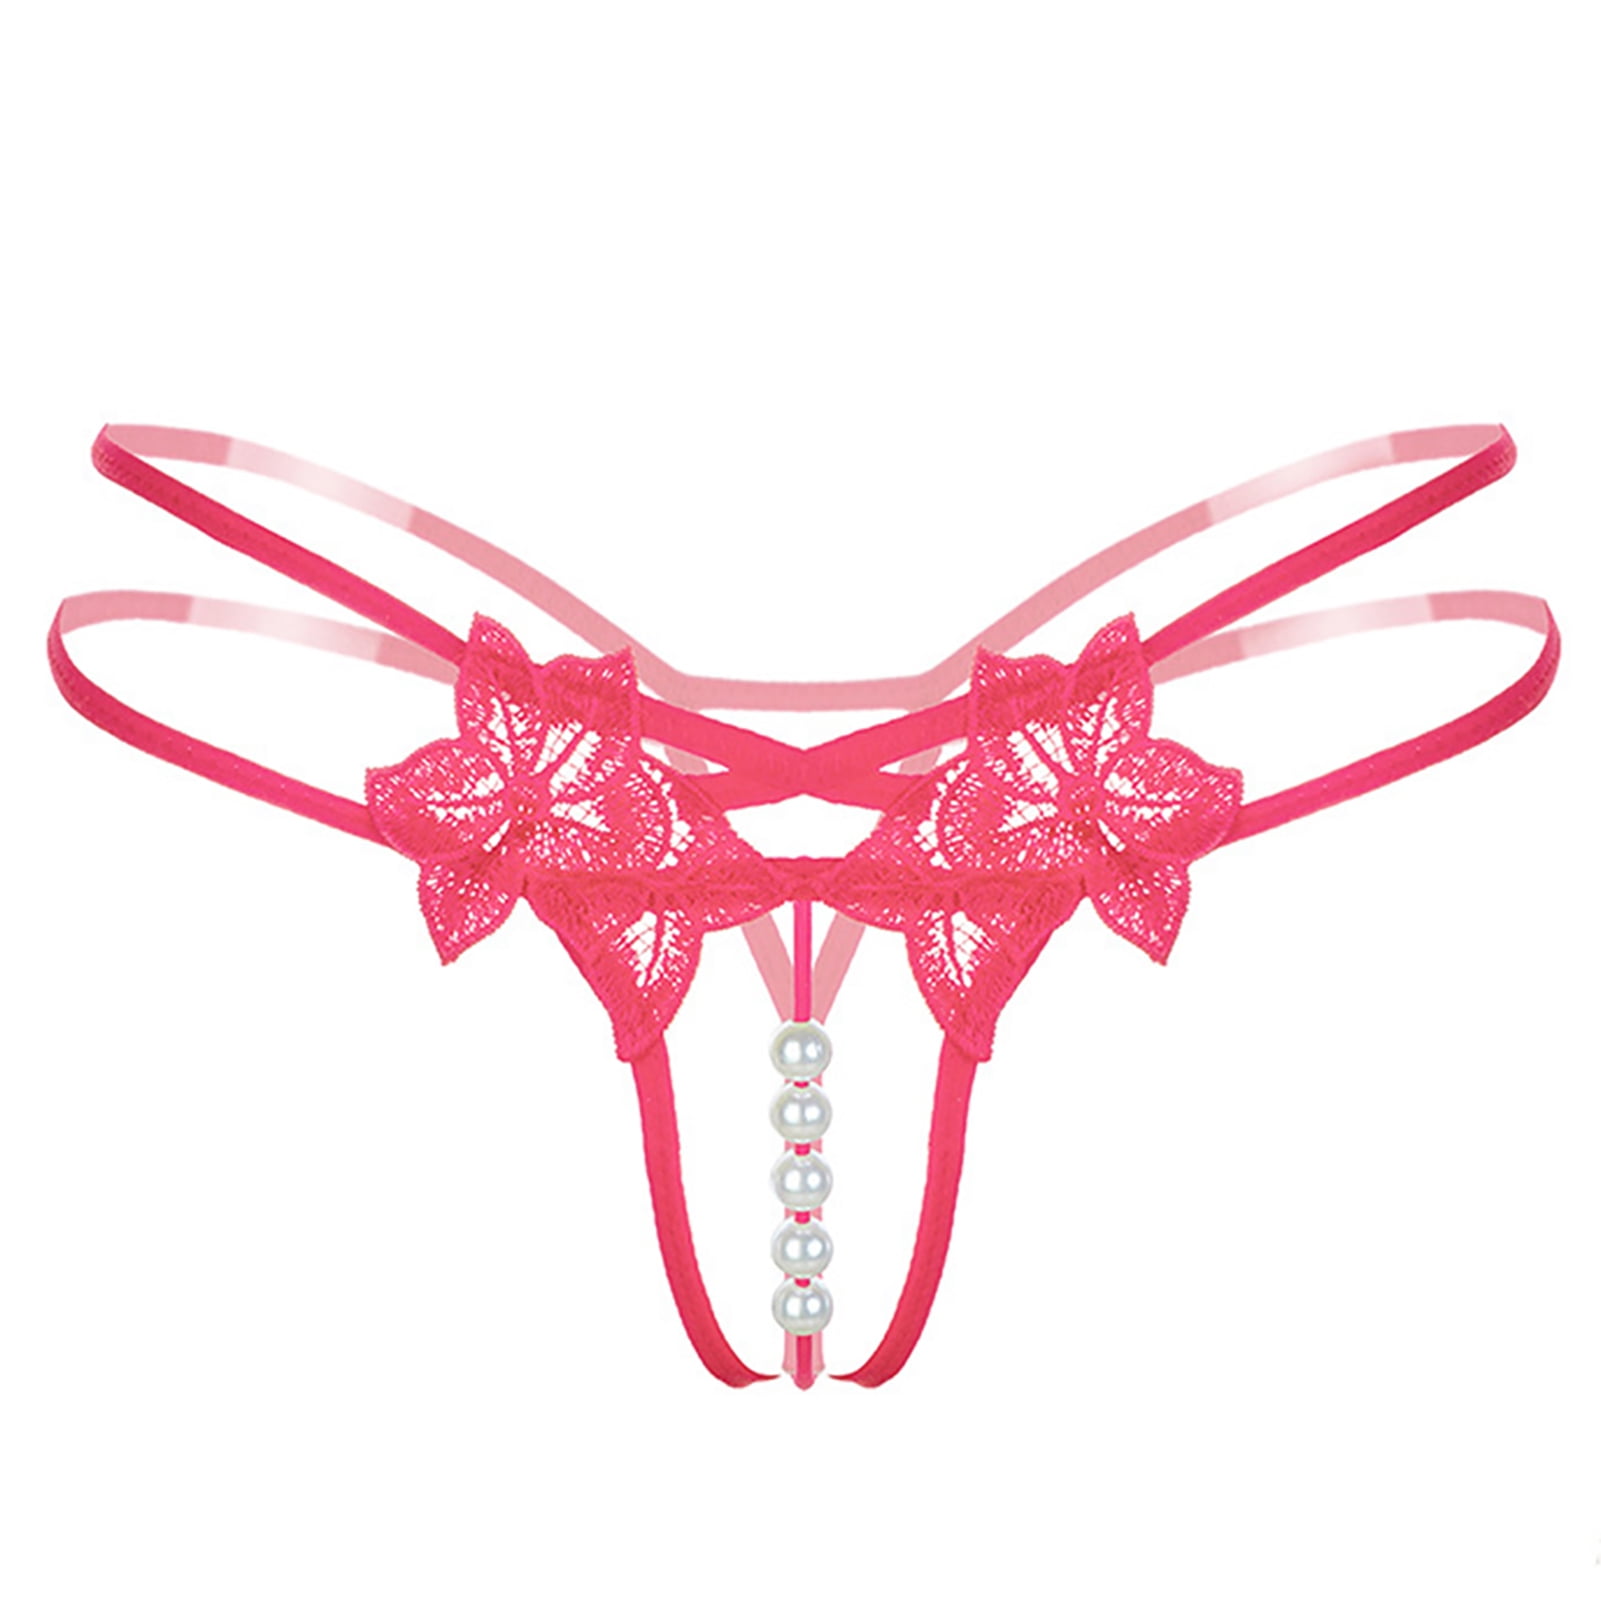 chahoo Women G-String Thongs,Lace Seamless Underwear Panties For